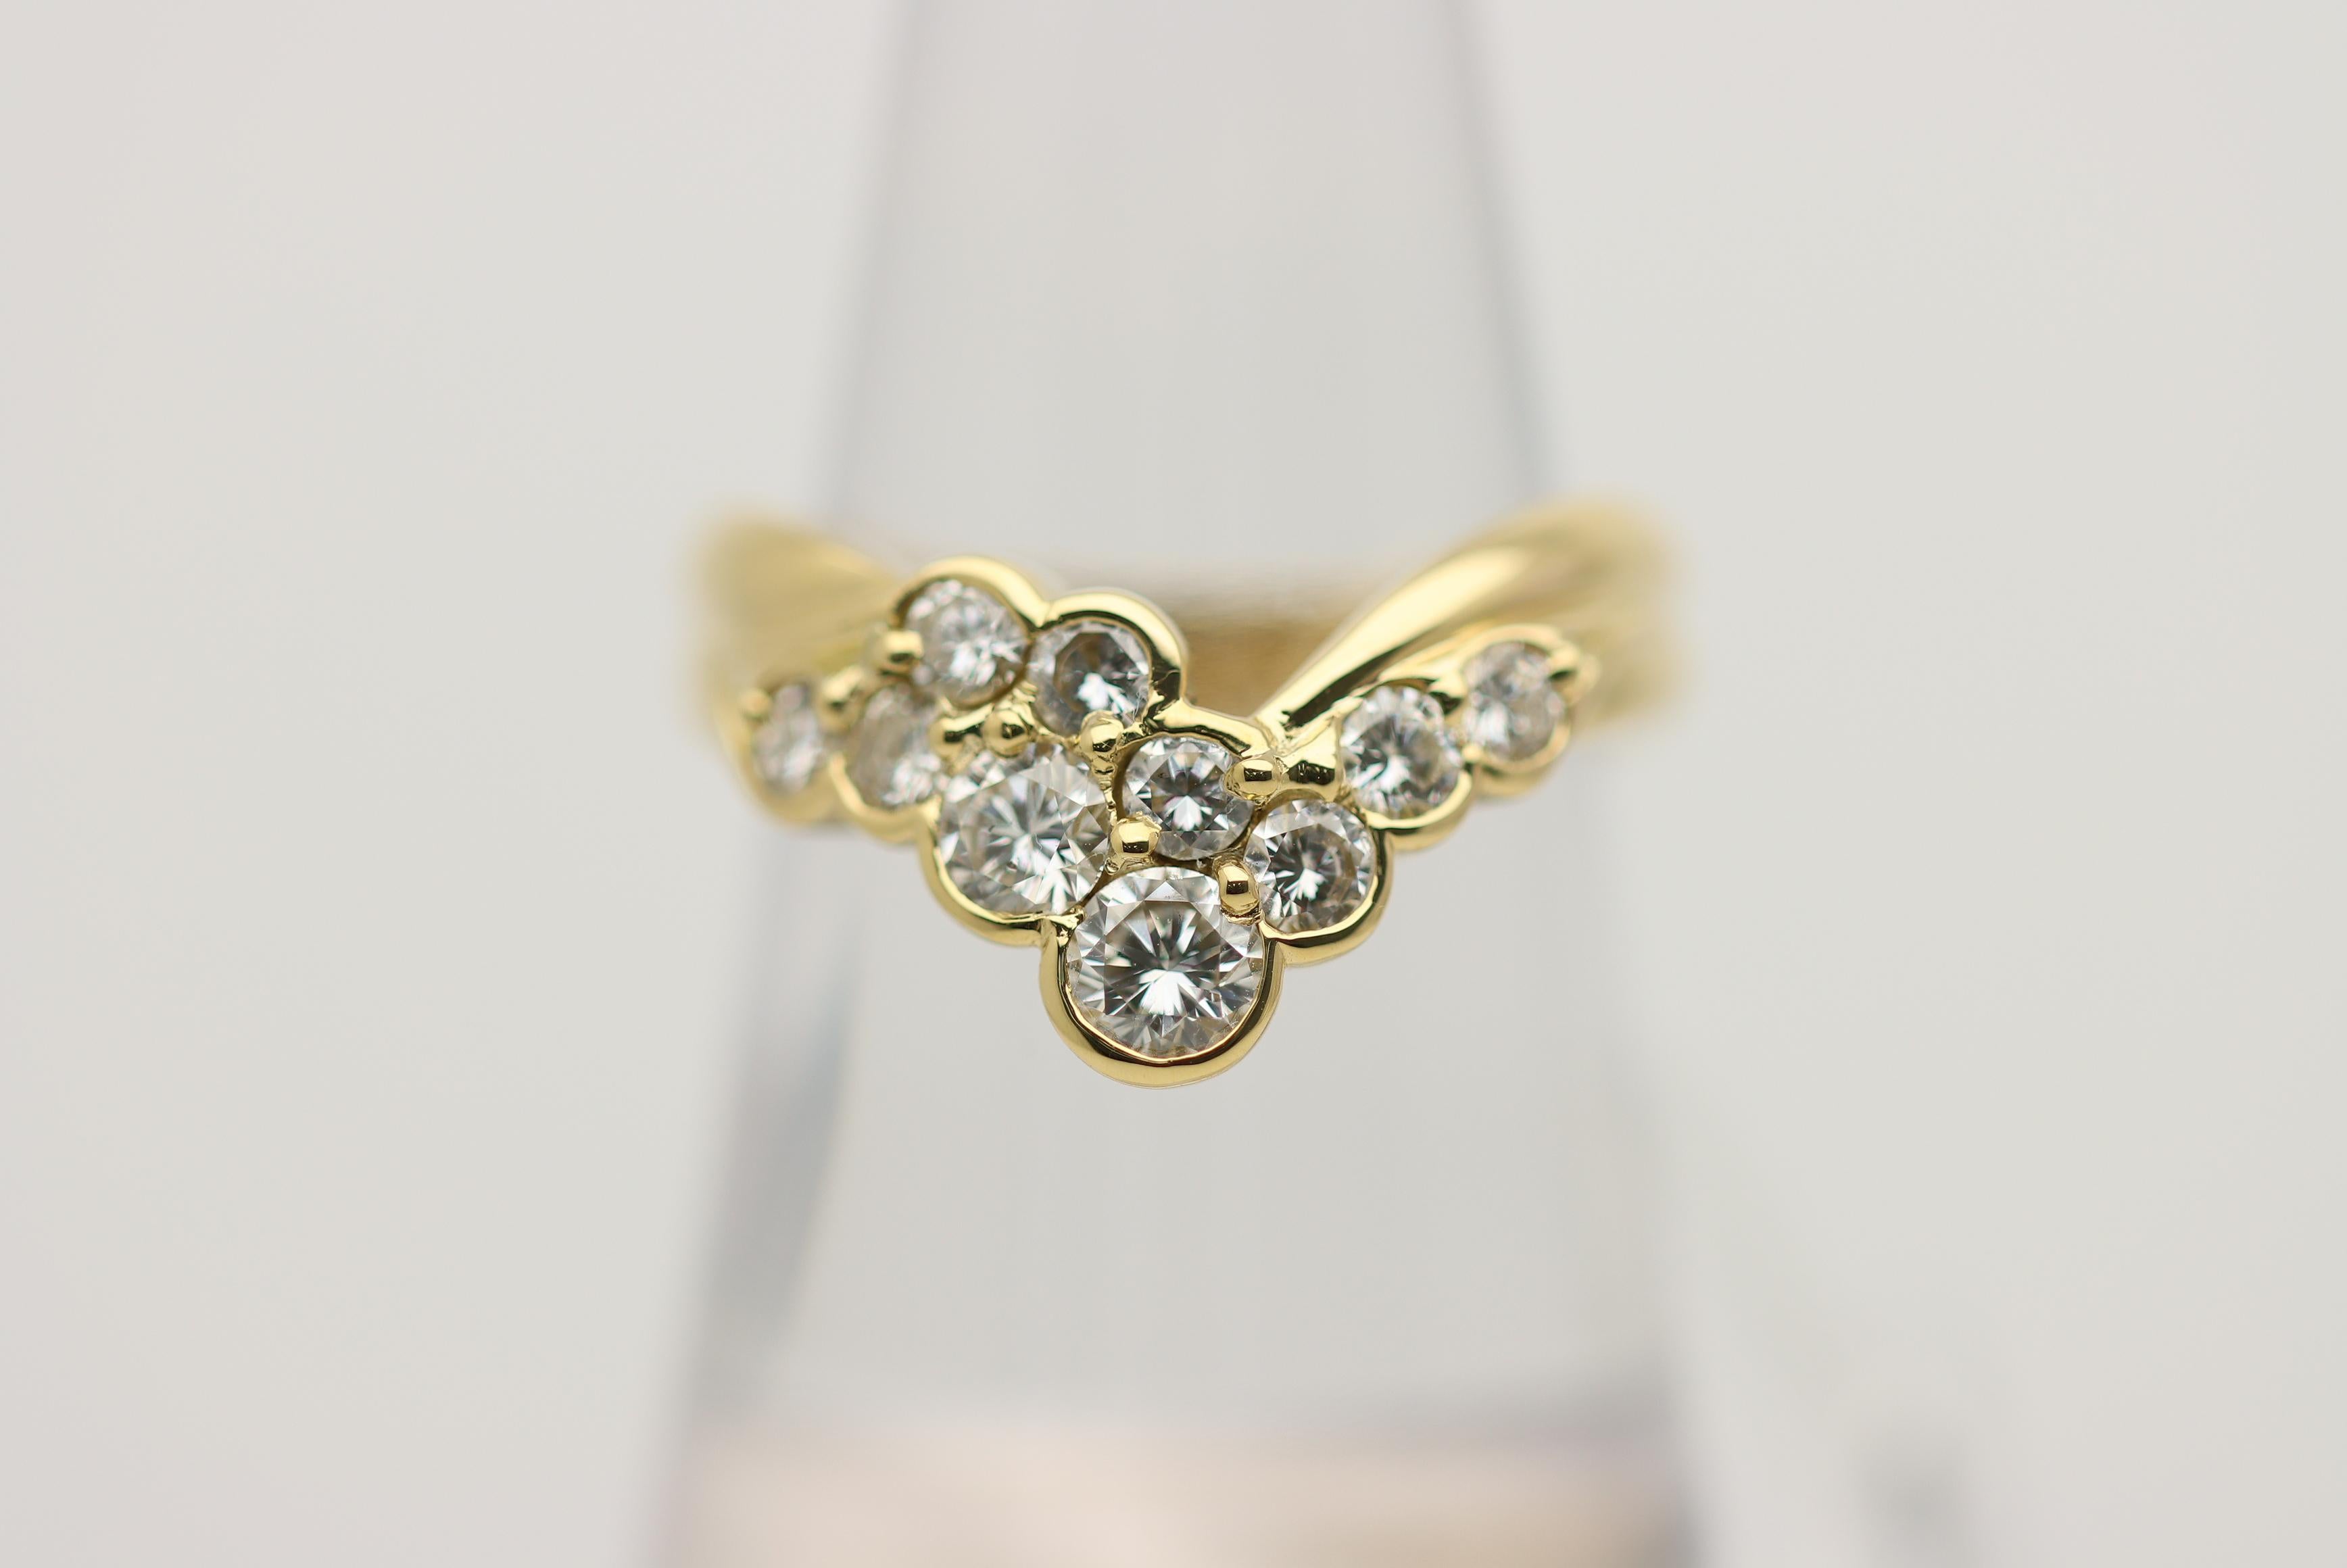 A classic V-shape diamond band with a unique and modern twist! It features 1.00 carat of larger round brilliant-cut diamonds which are both bezel and prong set in overlapping rows. Made in 18k yellow gold and ready to be worn.

Ring Size